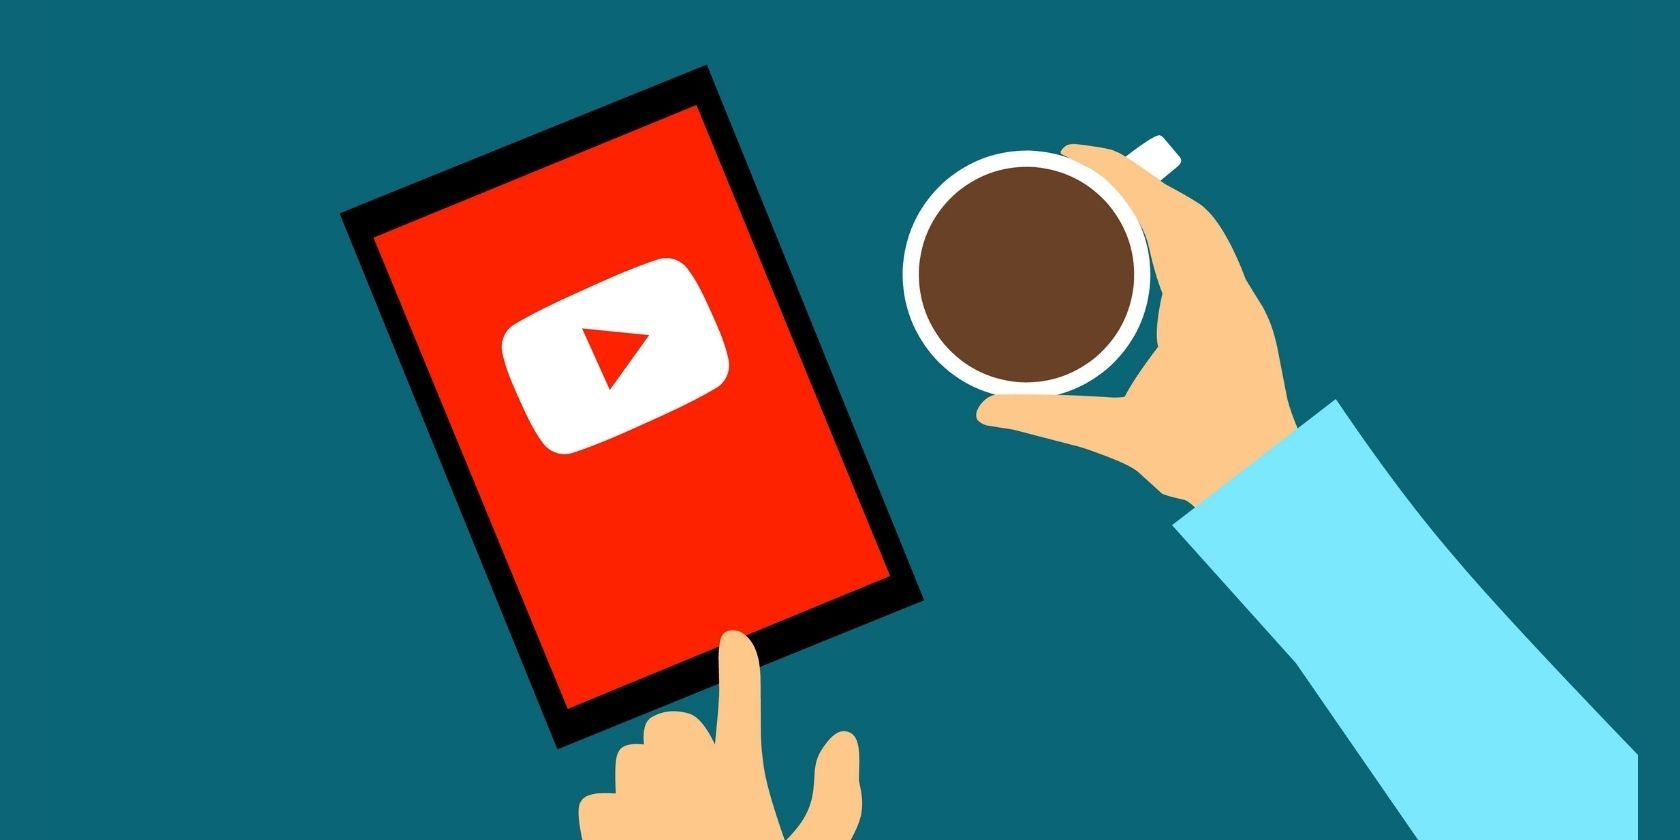 Illustration of a person using YouTube on a mobile device